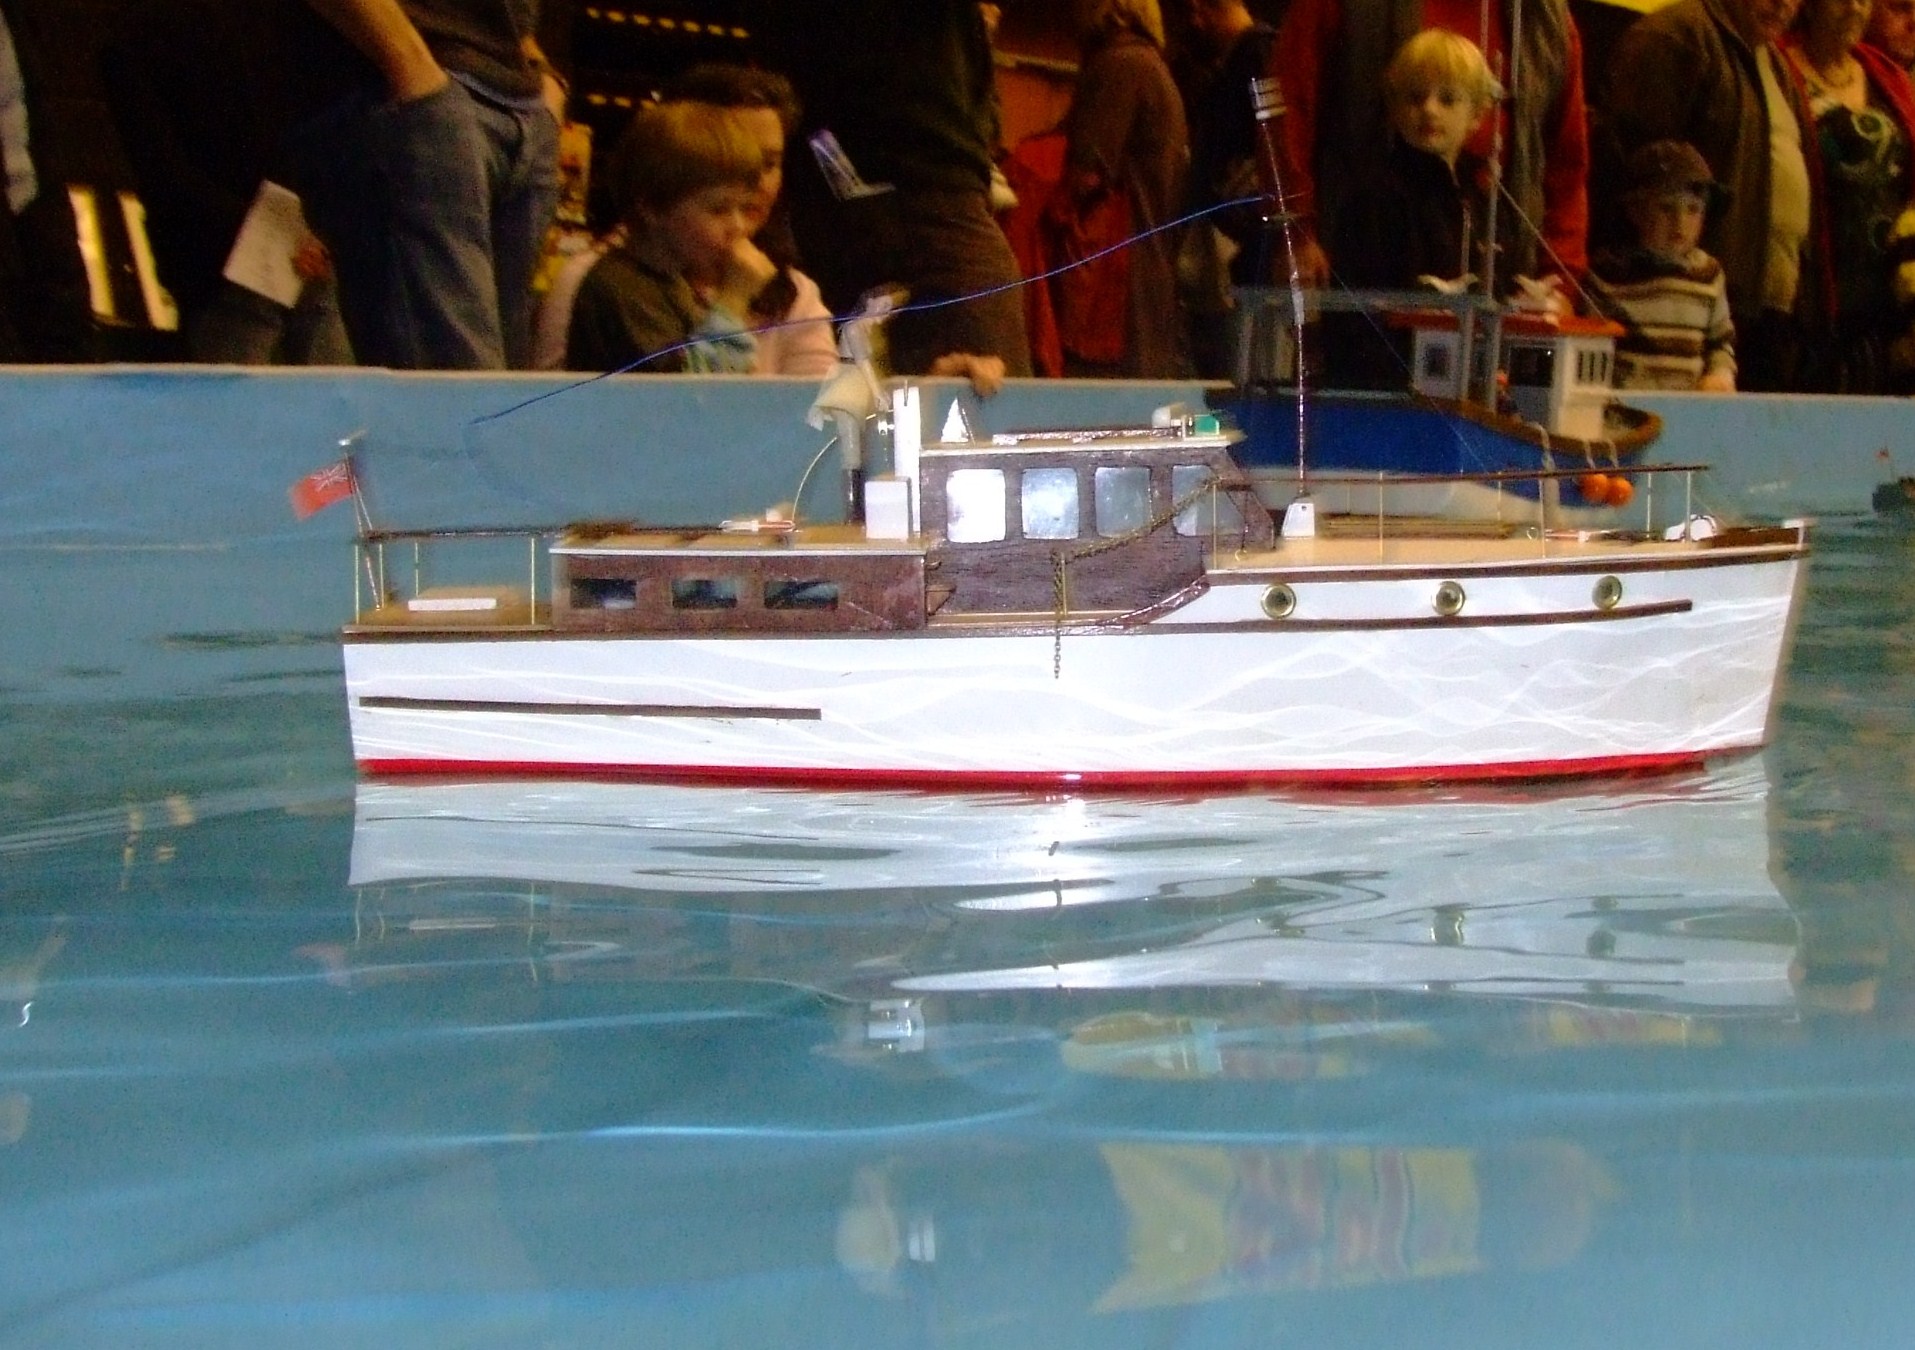 small model fishing boat in the open water at an event